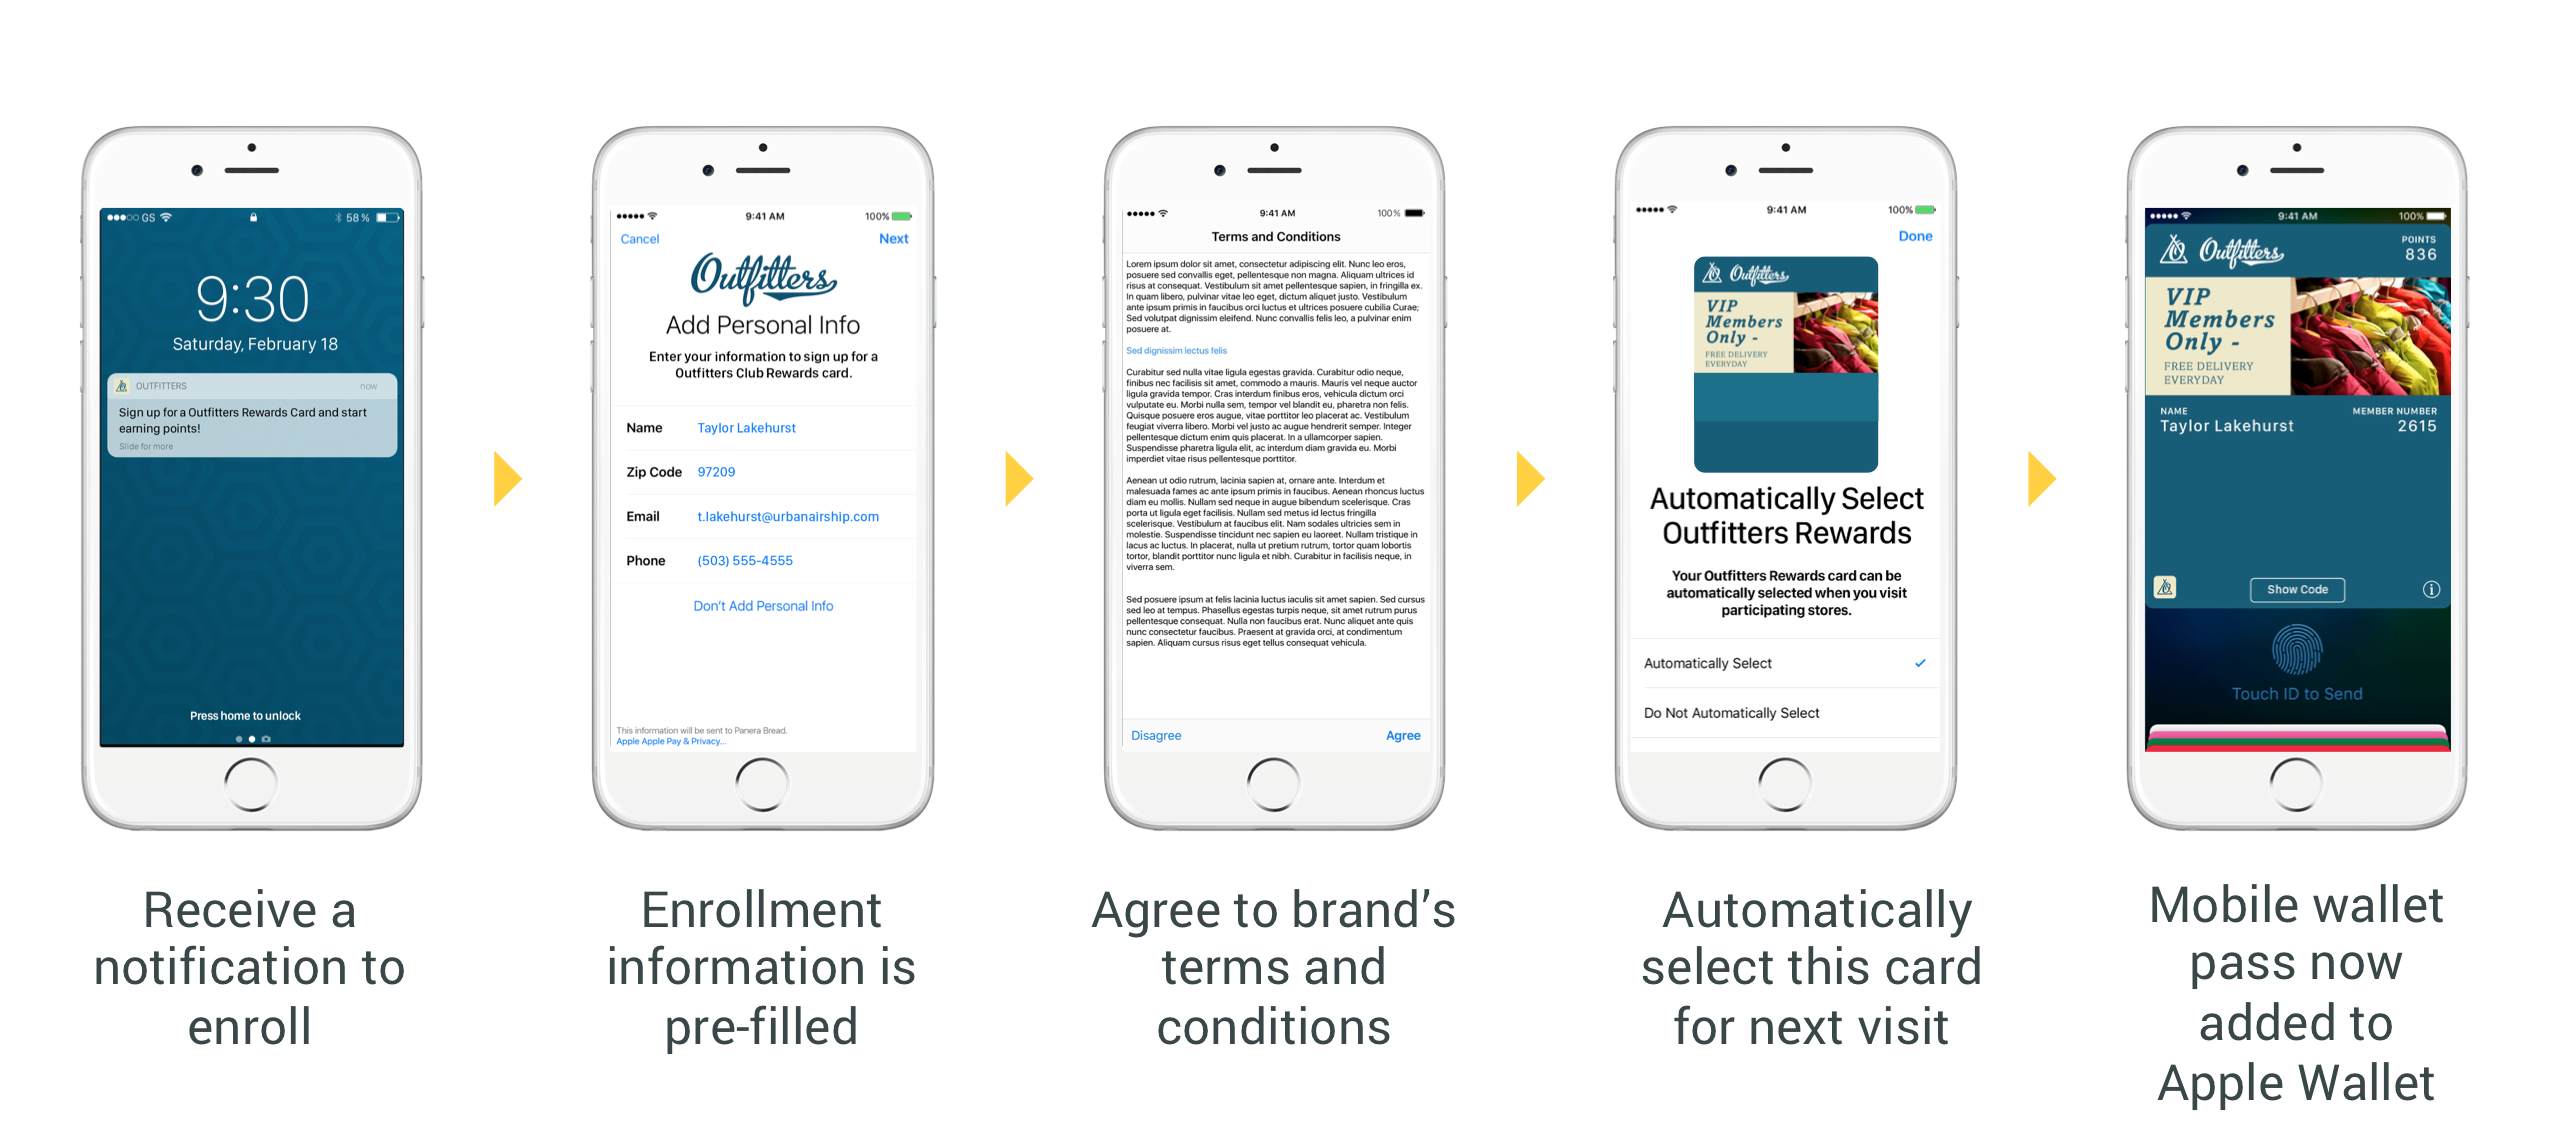 Auto rewards enrollment process enabled by Apple Wallet and Urban Airship Reach VAS support 